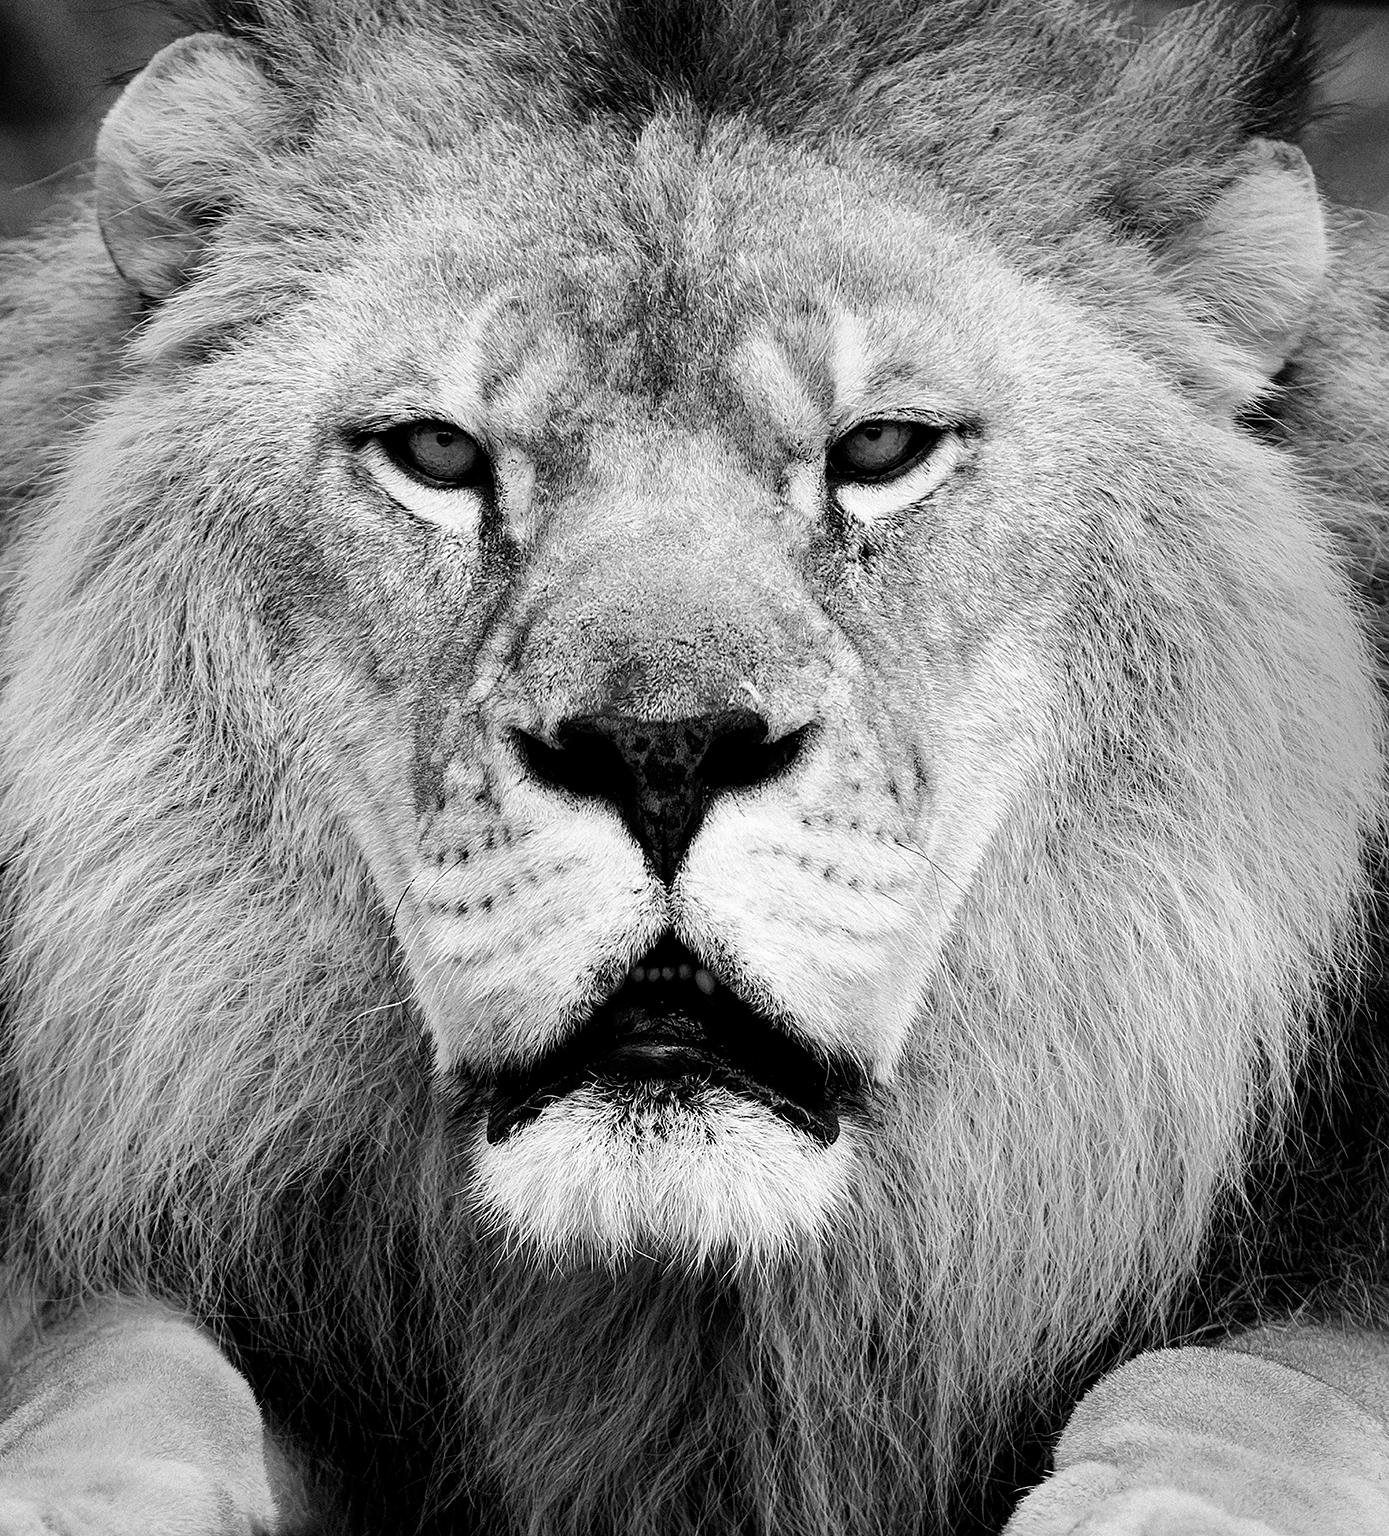 Shane Russeck Animal Print - "Face Off" "30x40" - Black & White Photography, Lion Photograph African Art